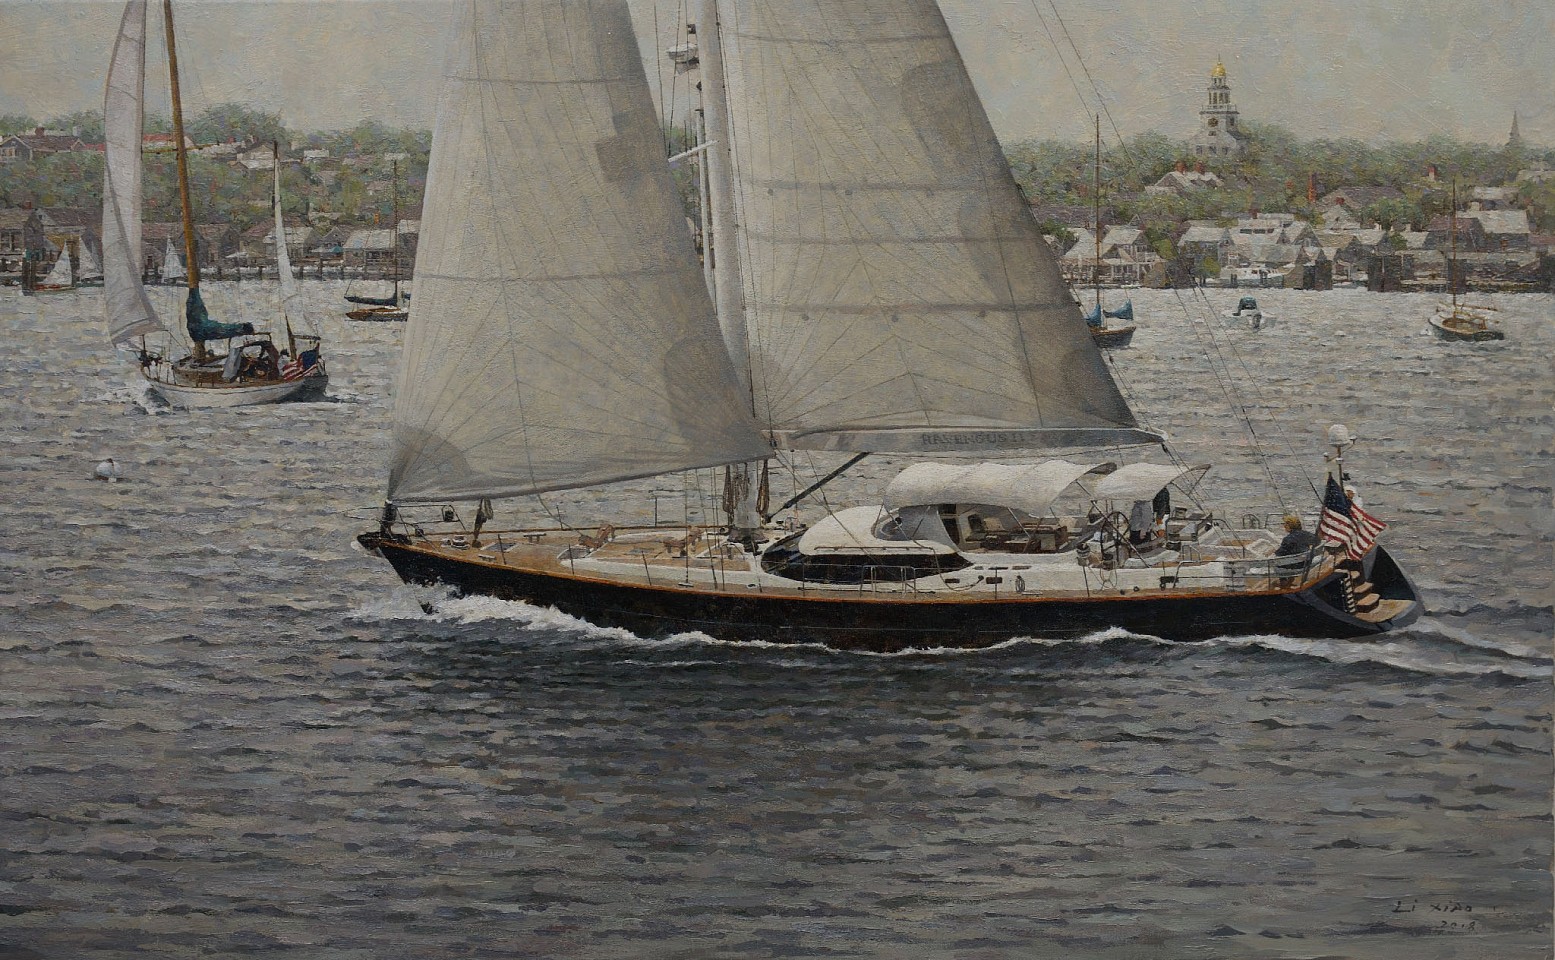 Li Xiao, Harbor-Front Sailing, Nantucket, 2018
oil on canvas, 30 x 48 in. (76.2 x 121.9 cm)
LX180801